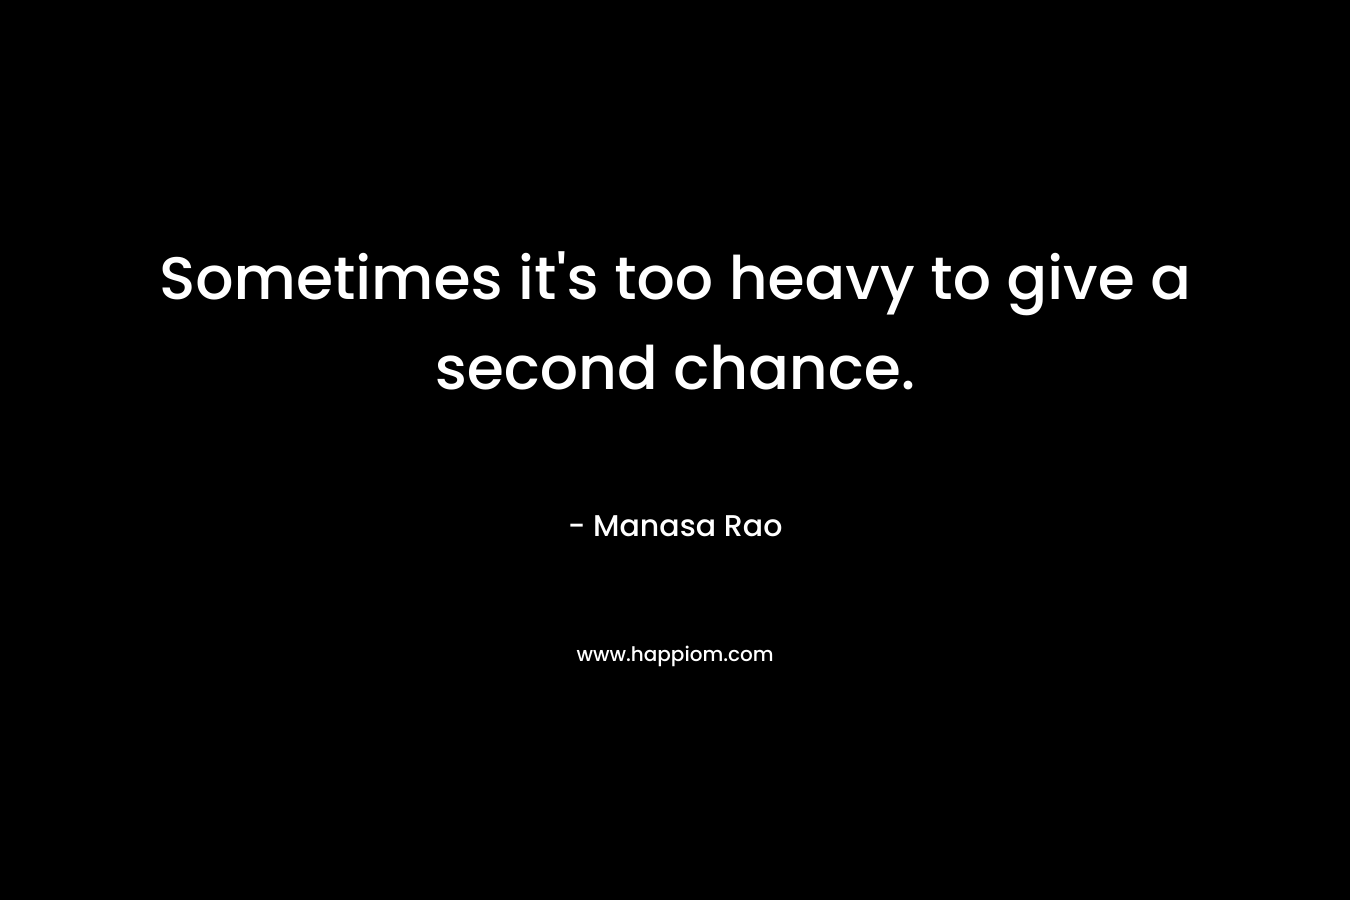 Sometimes it's too heavy to give a second chance.